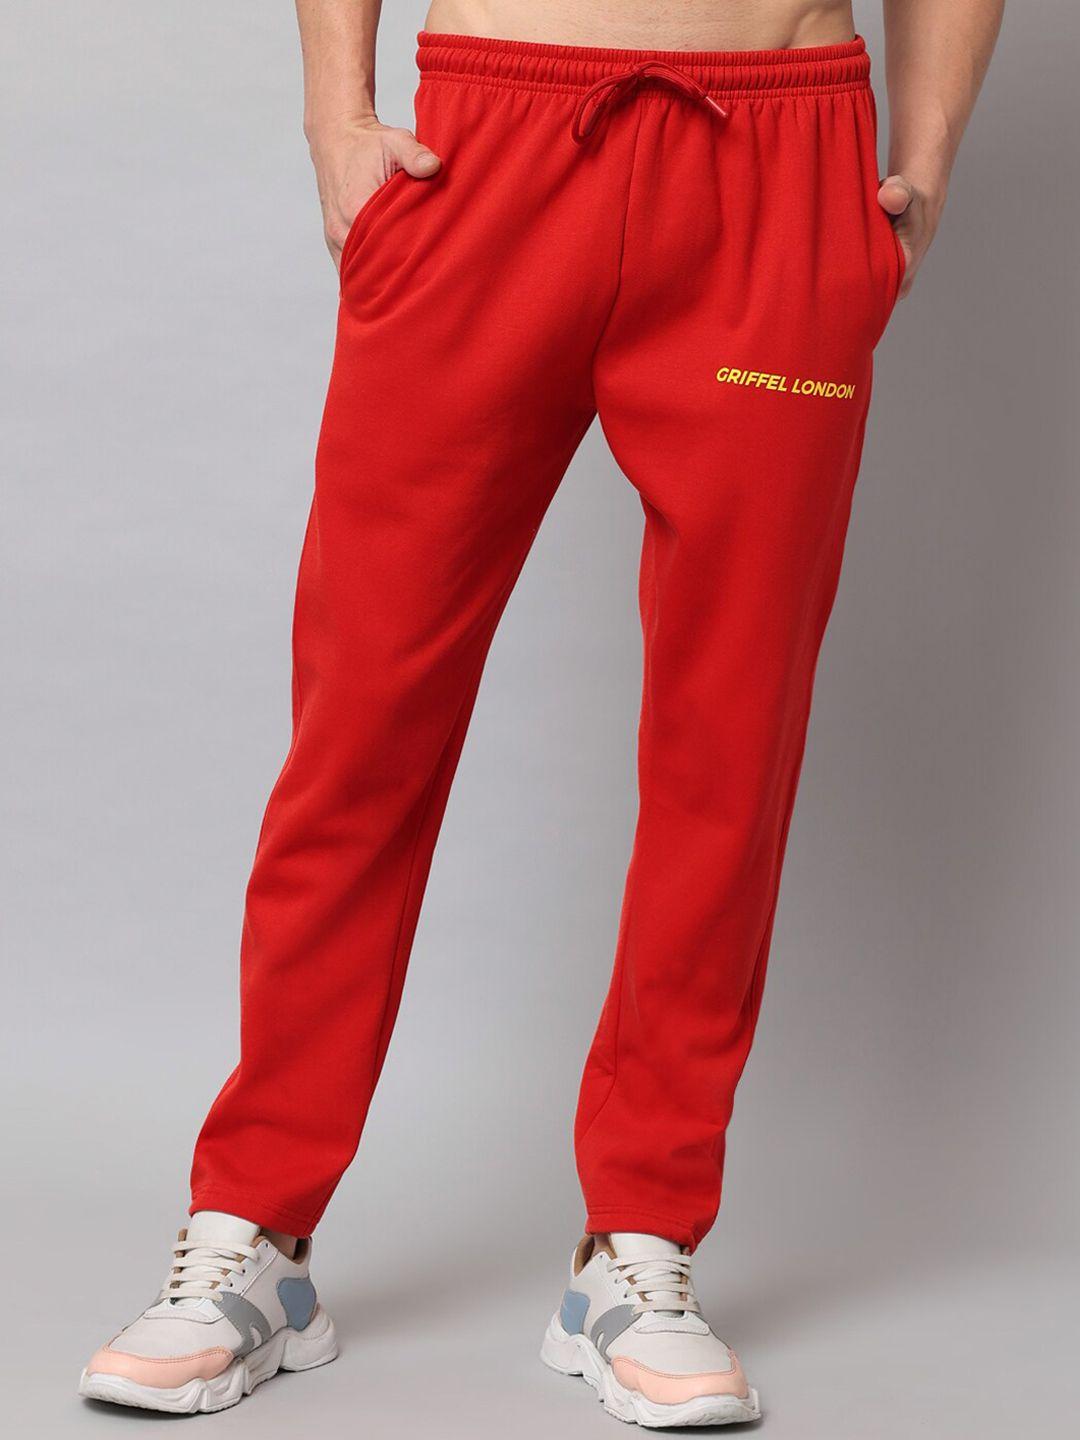 griffel-men-red-solid-cotton-track-pants